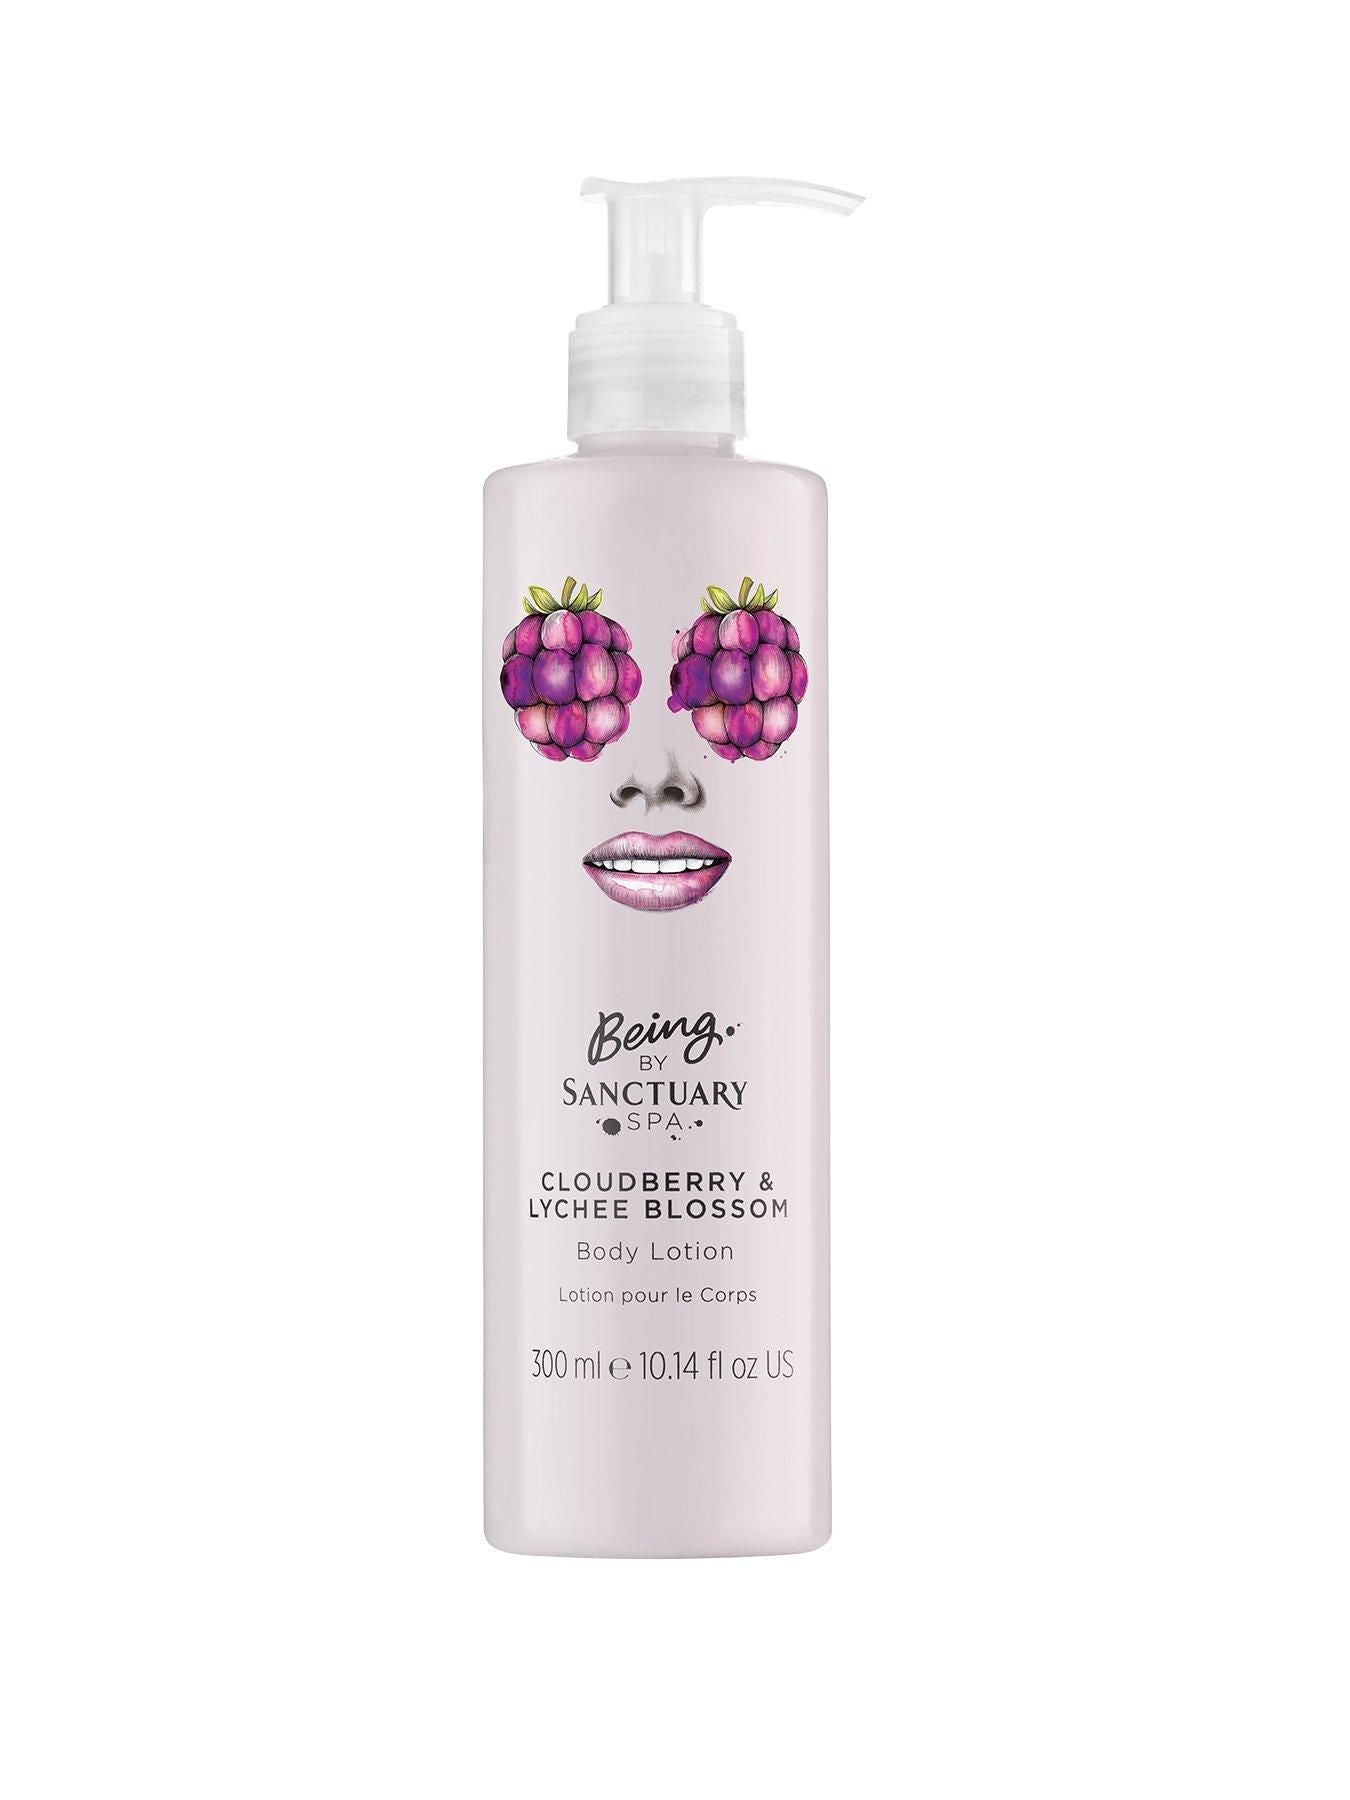 Being by Sanctuary Spa Cloudberry & Lychee Blossom Body Lotion 300ml